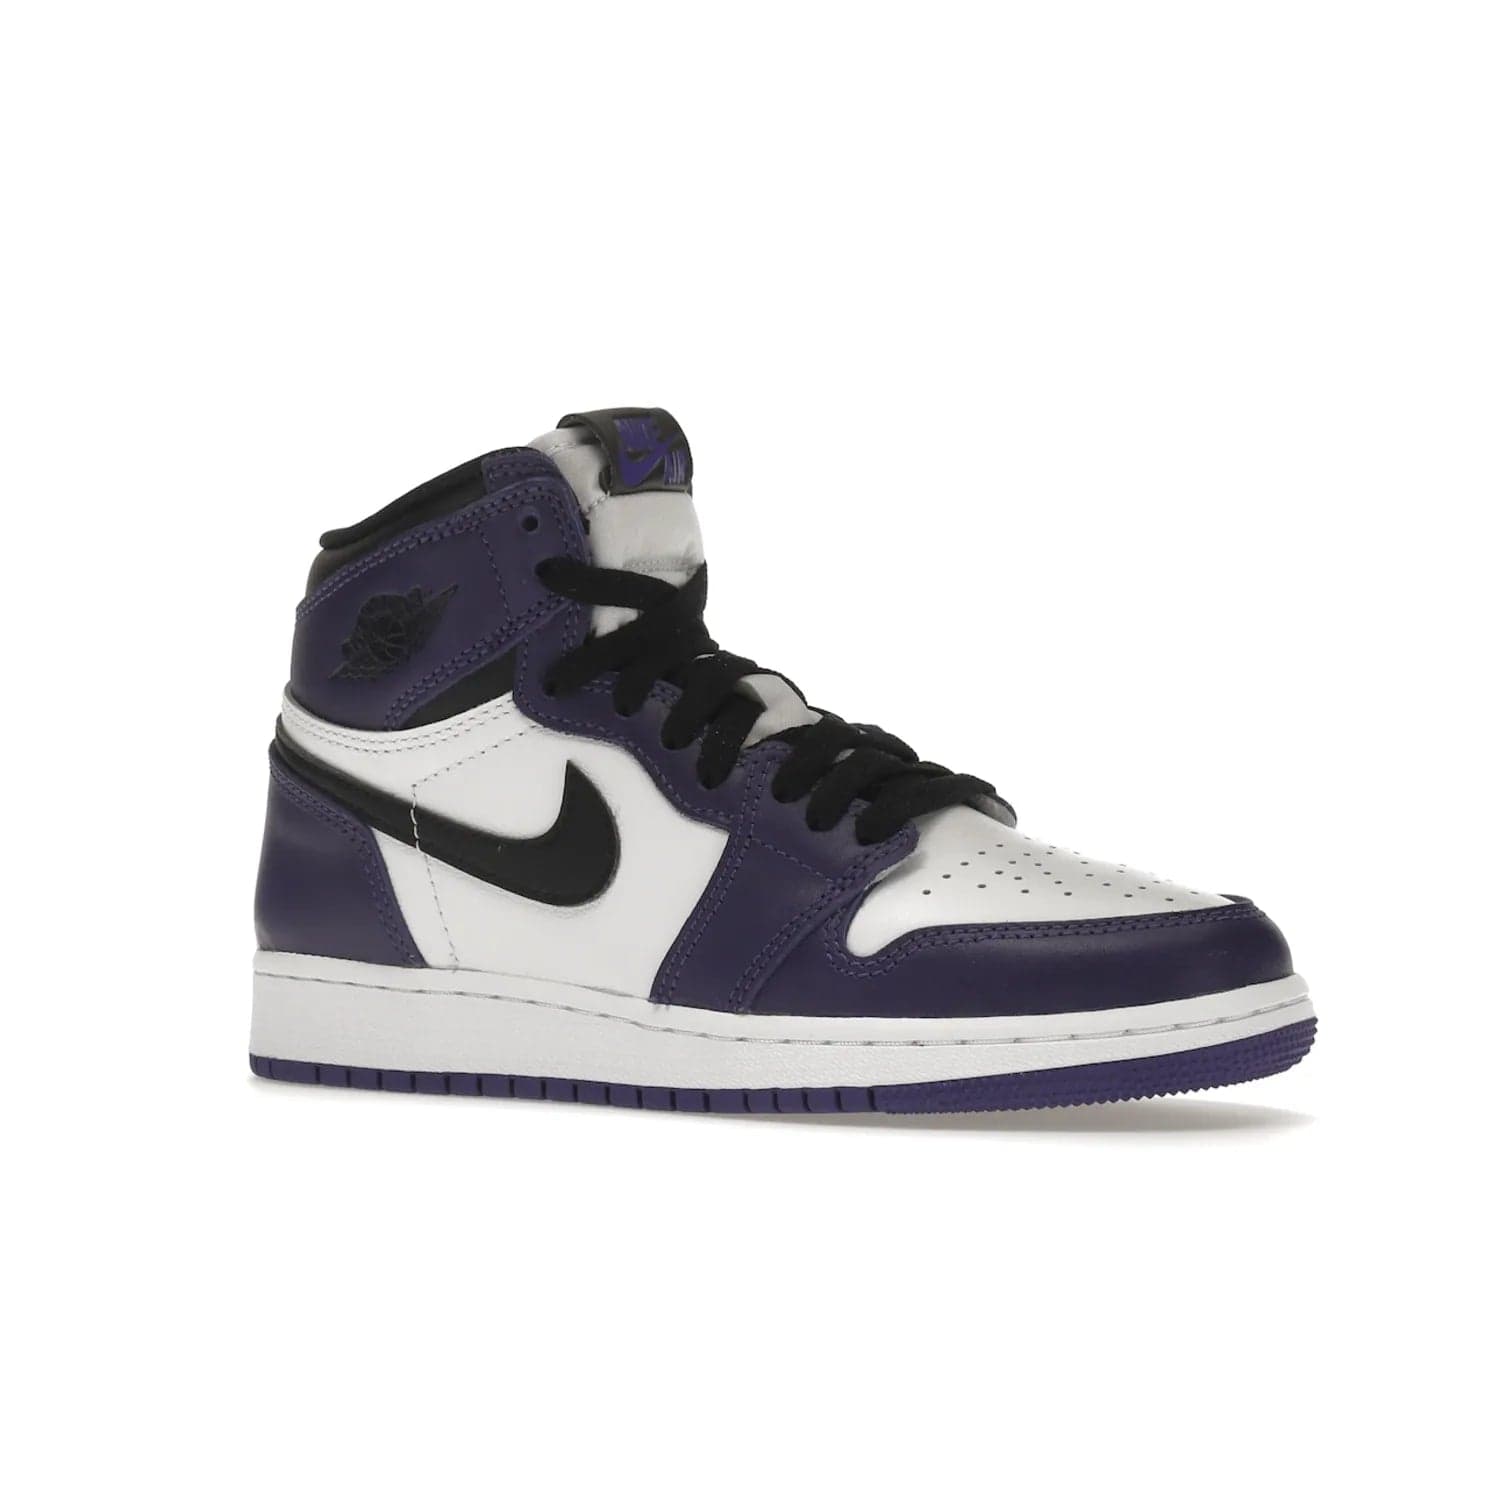 Jordan 1 Retro High Court Purple White (GS) - Image 4 - Only at www.BallersClubKickz.com - The Air Jordan 1 Retro High Court Purple is here and young sneaker heads can show off classic style. Features a white tumbled leather upper, black swoosh, purple overlays, black collar with purple overlay, white tongue, black patch with purple Nike Air logo and swoosh, white midsole, and purple rubber outsole with circular pattern.